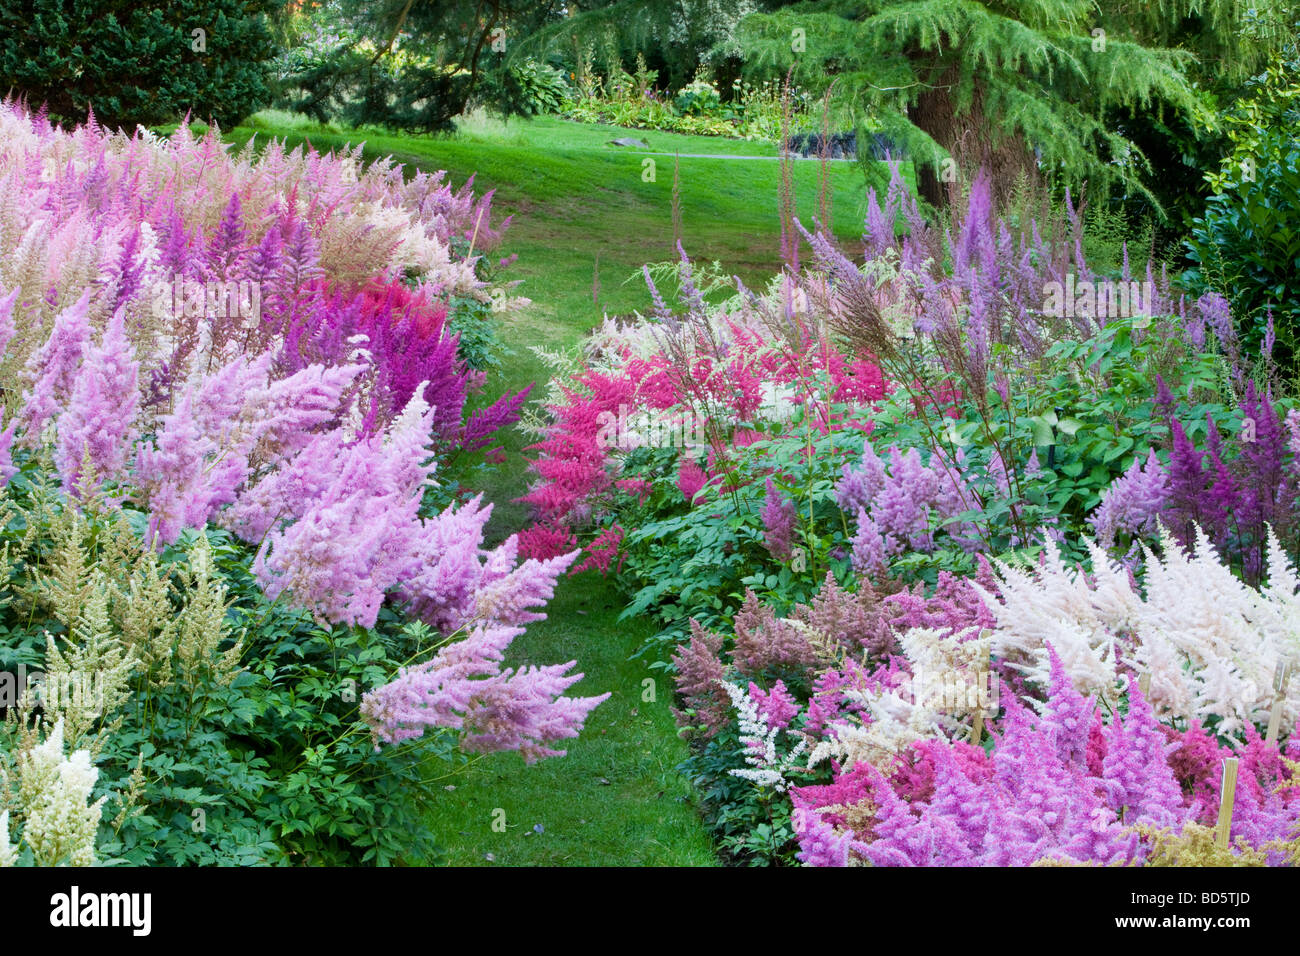 The National Collection of Astilbe s at Holehird Garden Windermere Cumbria UK Stock Photo